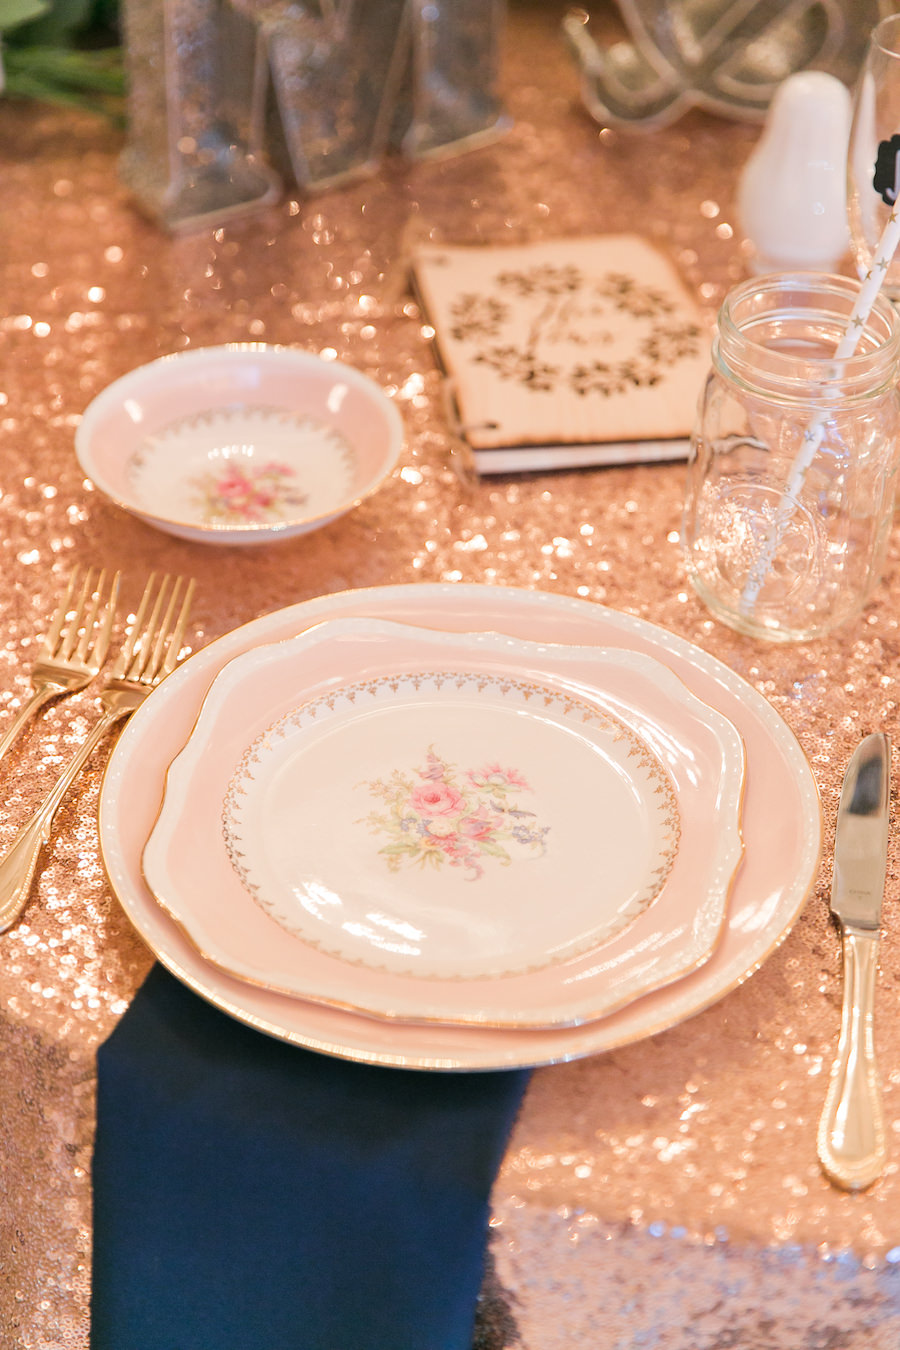 Blush Pink and Rose Gold Wedding Reception Place Settings with Vintage China on Rose Gold Sequin Tablecloth